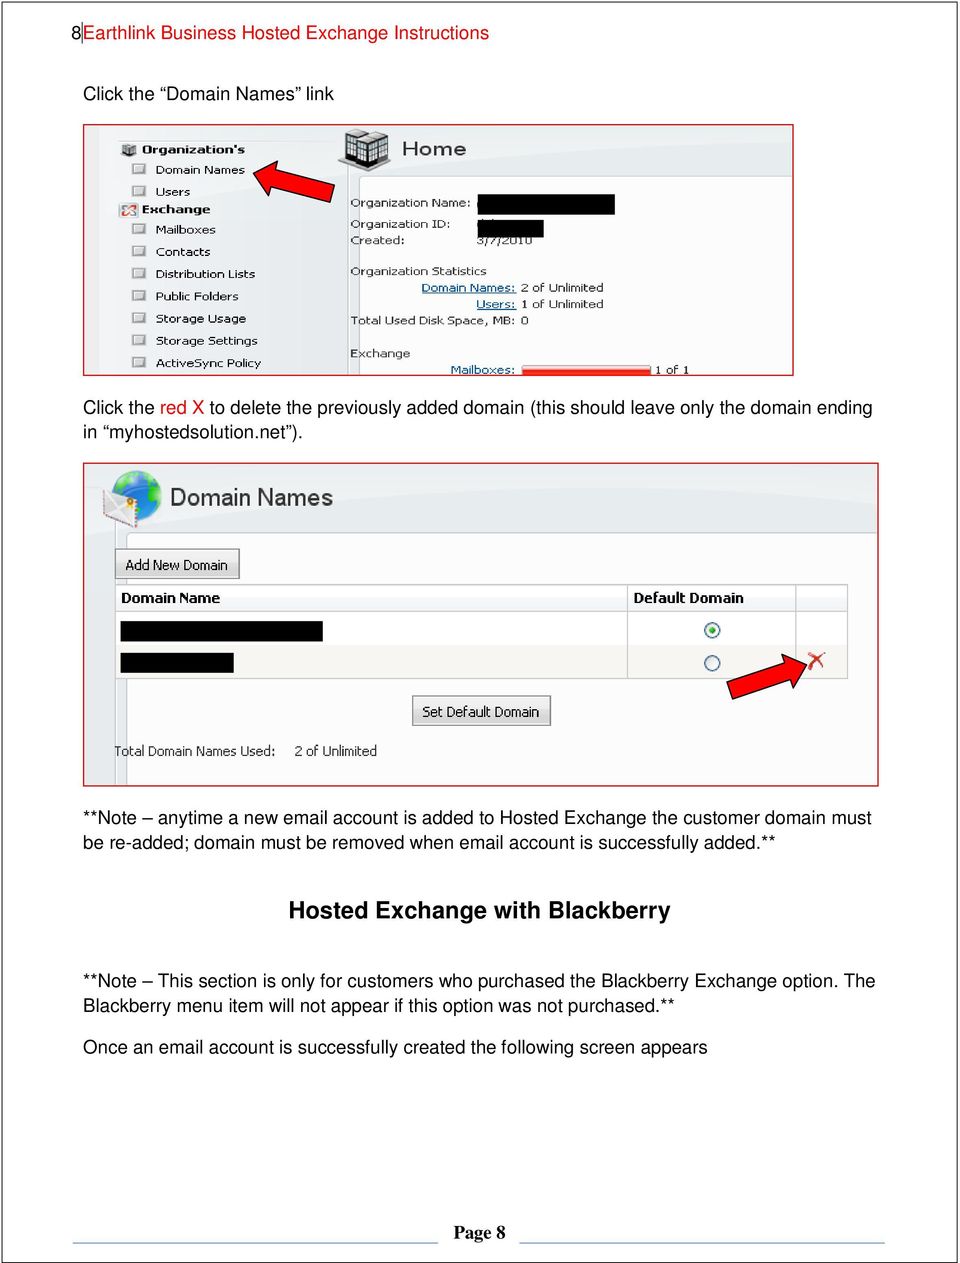 **Note anytime a new email account is added to Hosted Exchange the customer domain must be re-added; domain must be removed when email account is successfully